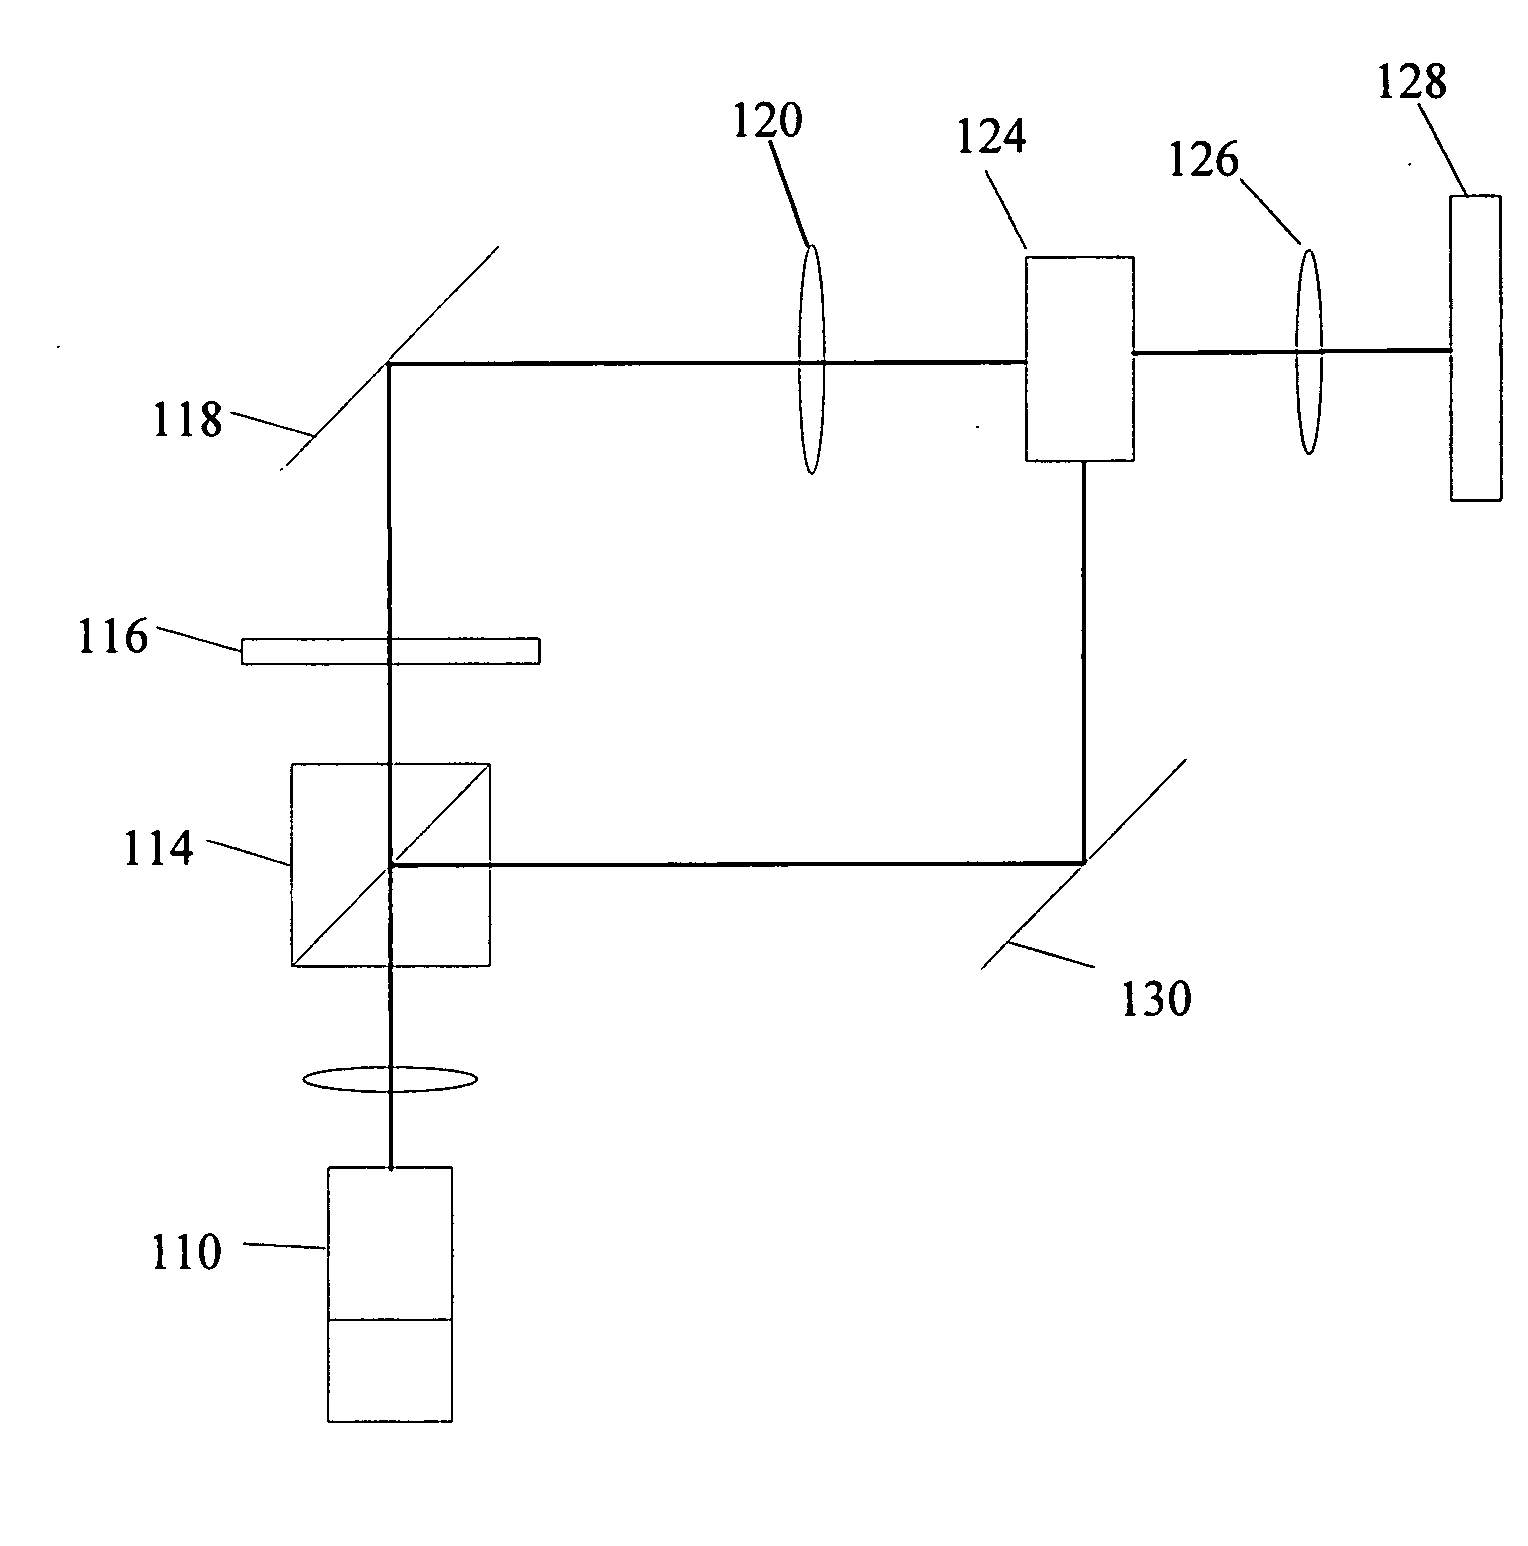 Holographic recording system having a relay system